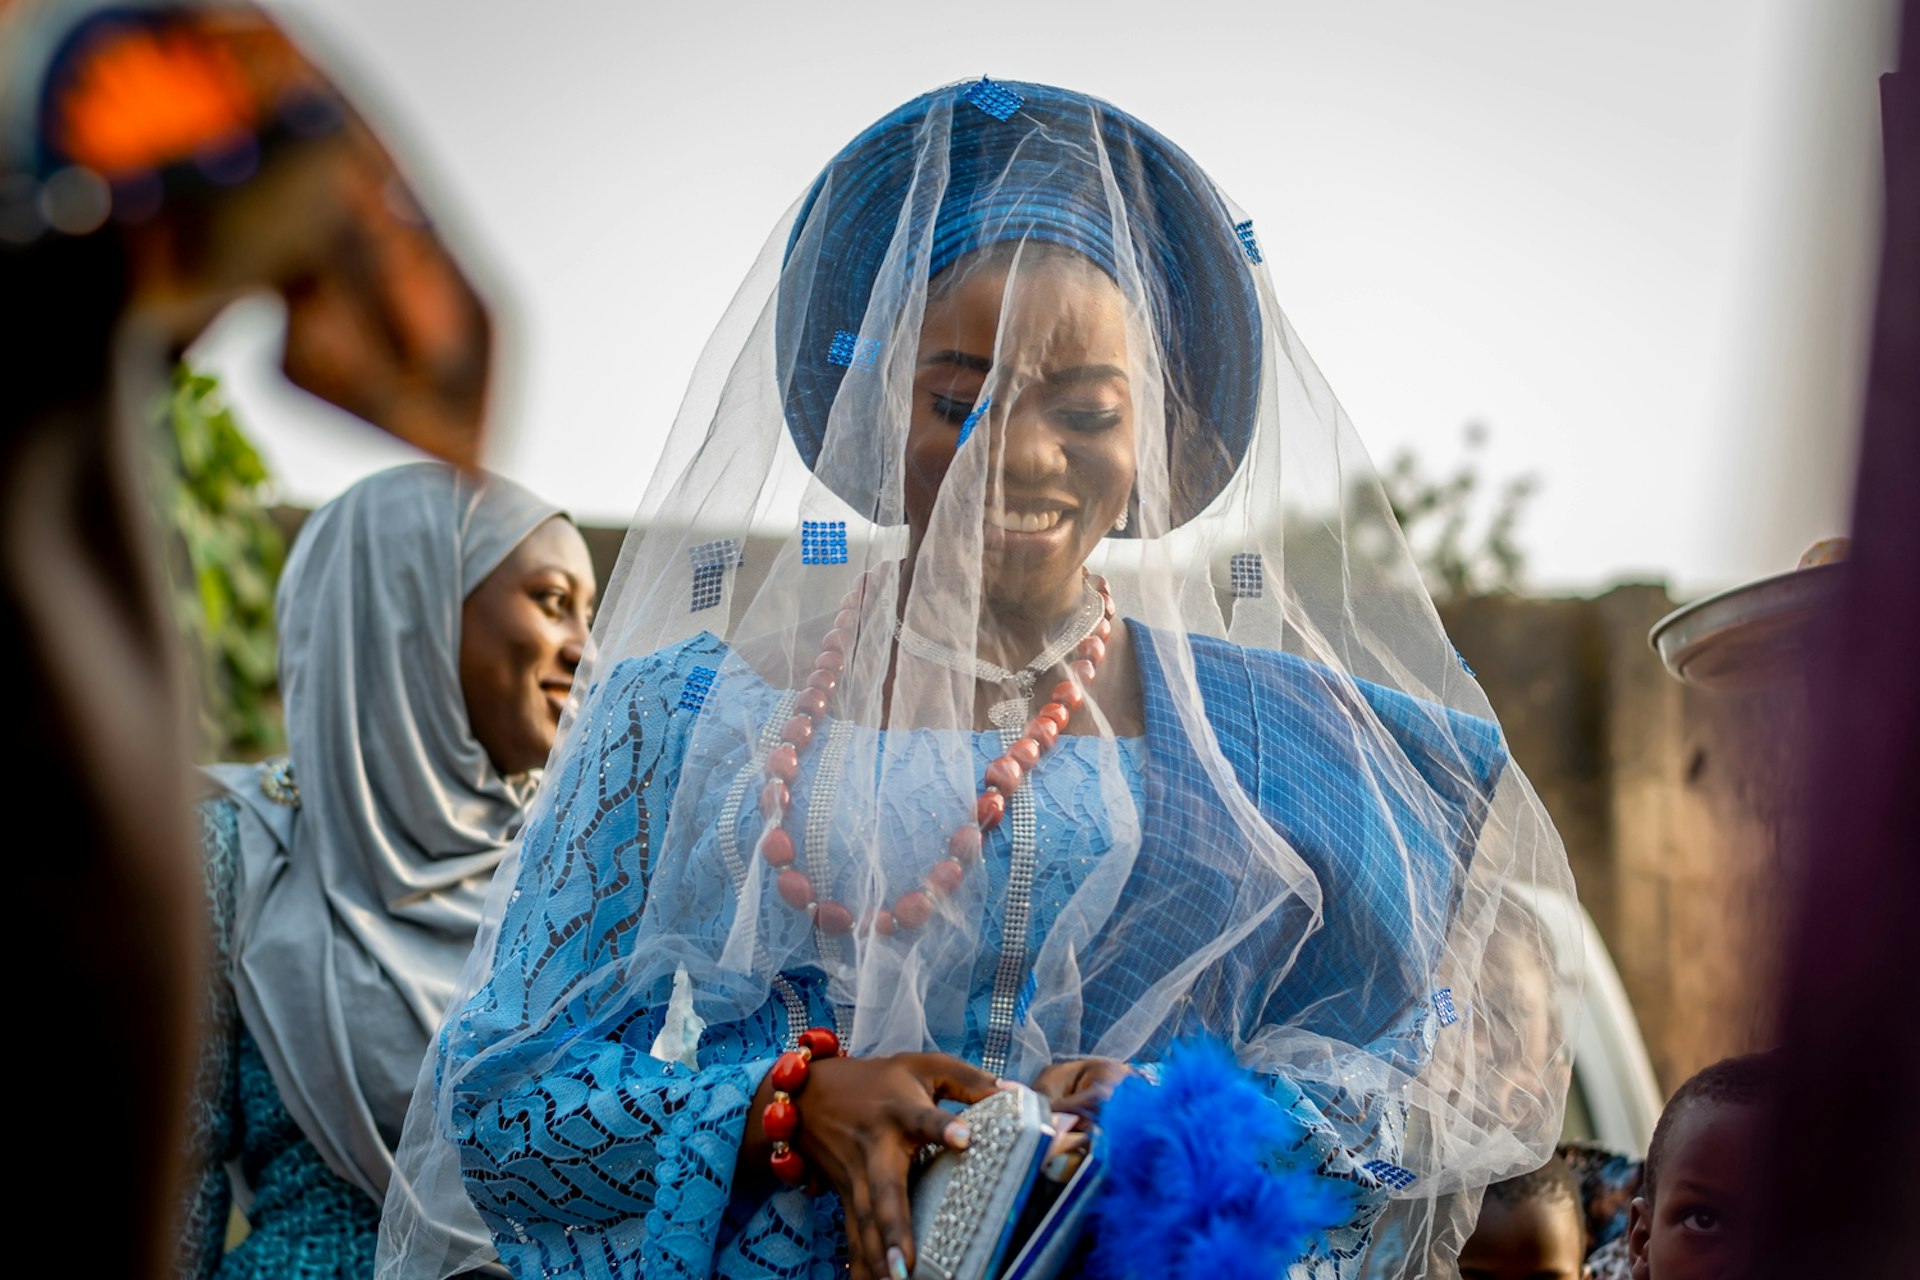 A woman dressed in blue with a light veil covering her head and face smiles at a wedding celebration